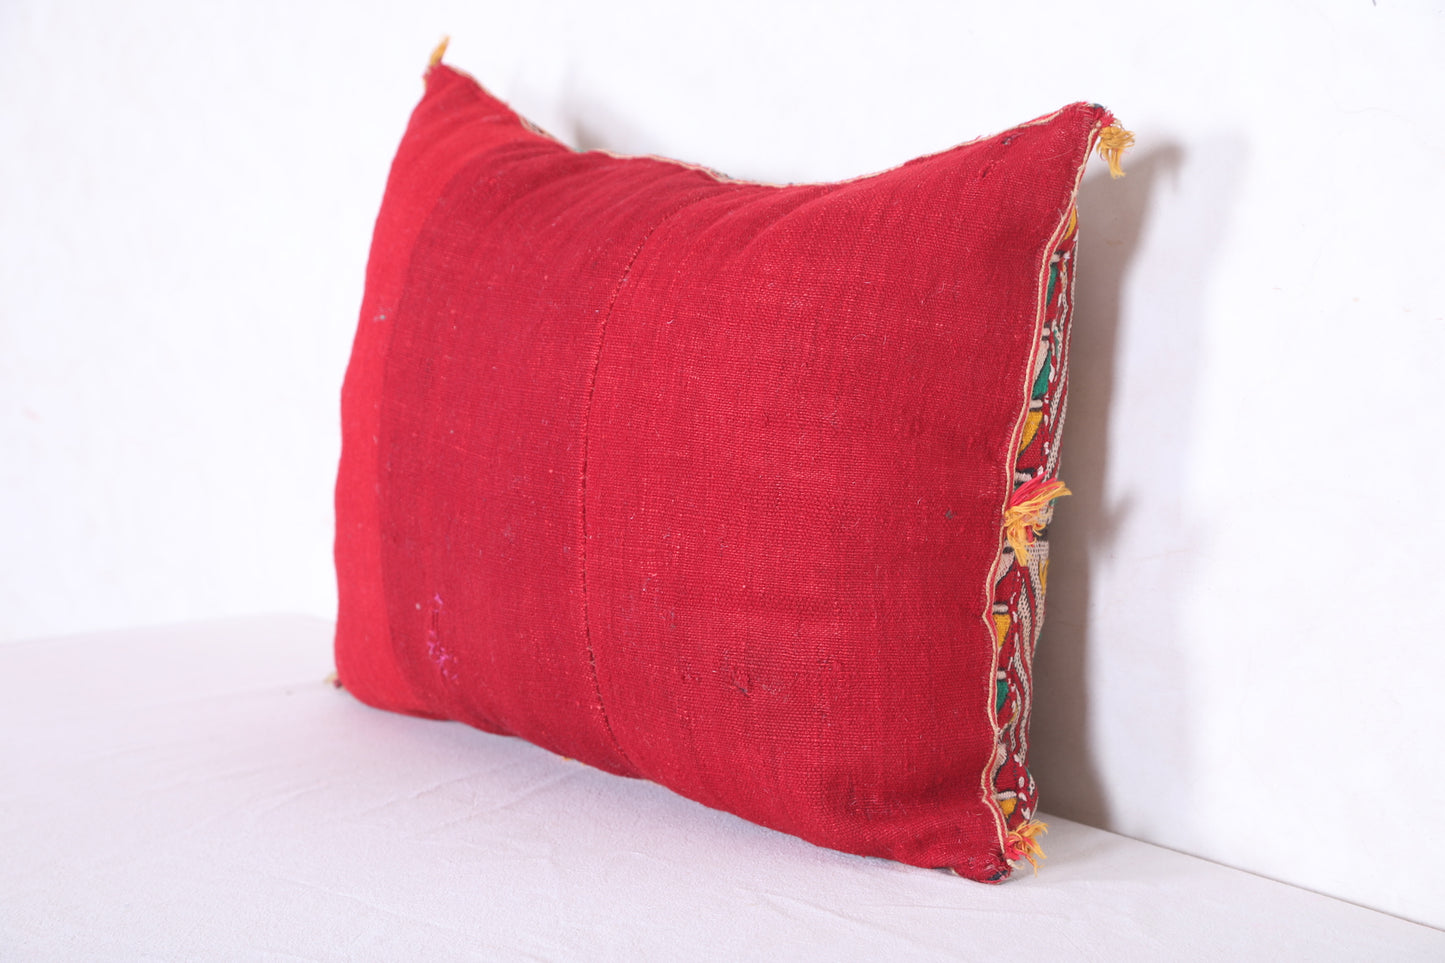 Moroccan handmade kilim pillow 17.3 INCHES X 22 INCHES